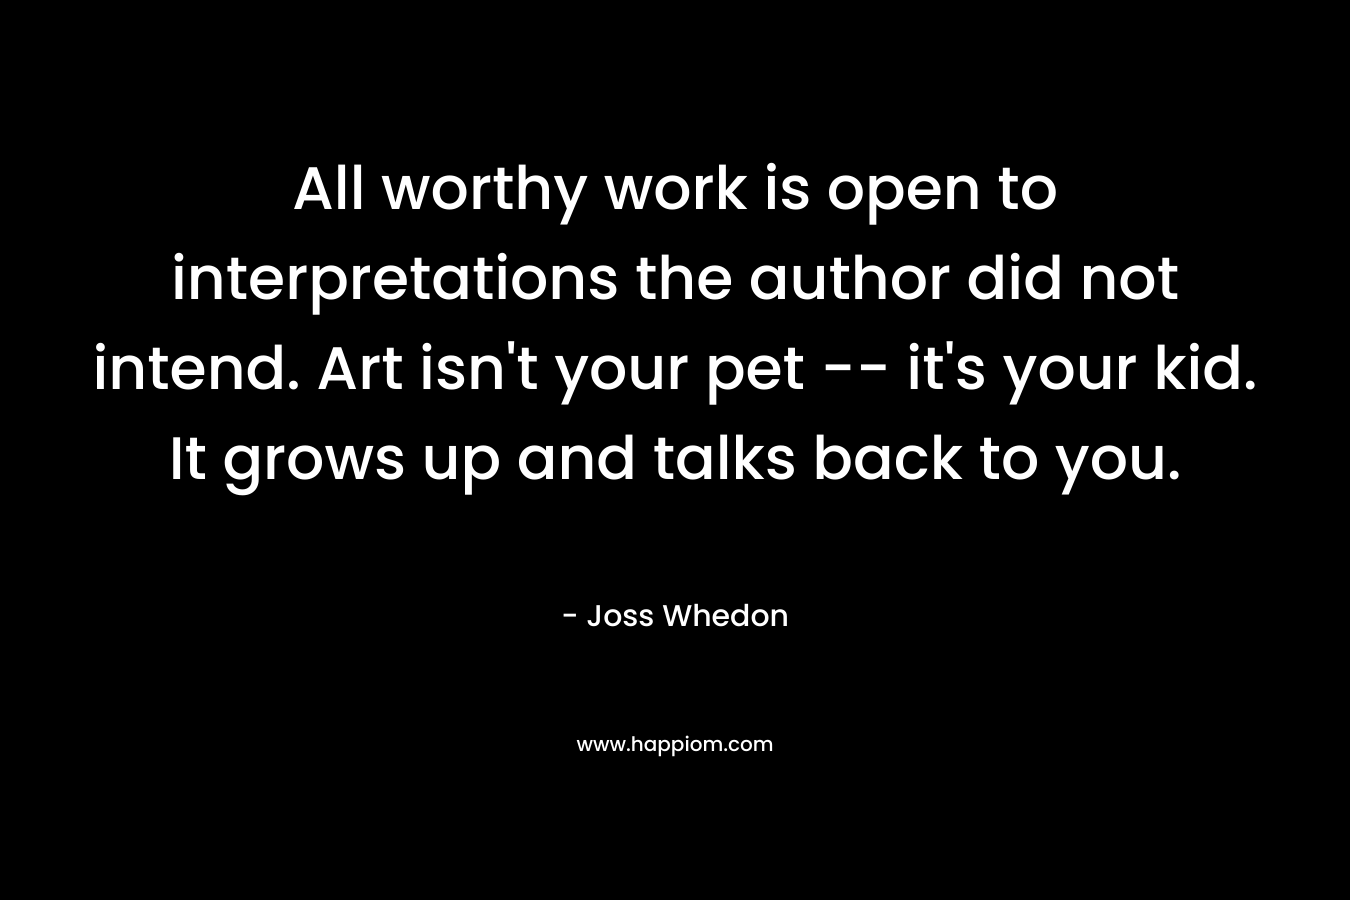 All worthy work is open to interpretations the author did not intend. Art isn’t your pet — it’s your kid. It grows up and talks back to you. – Joss Whedon